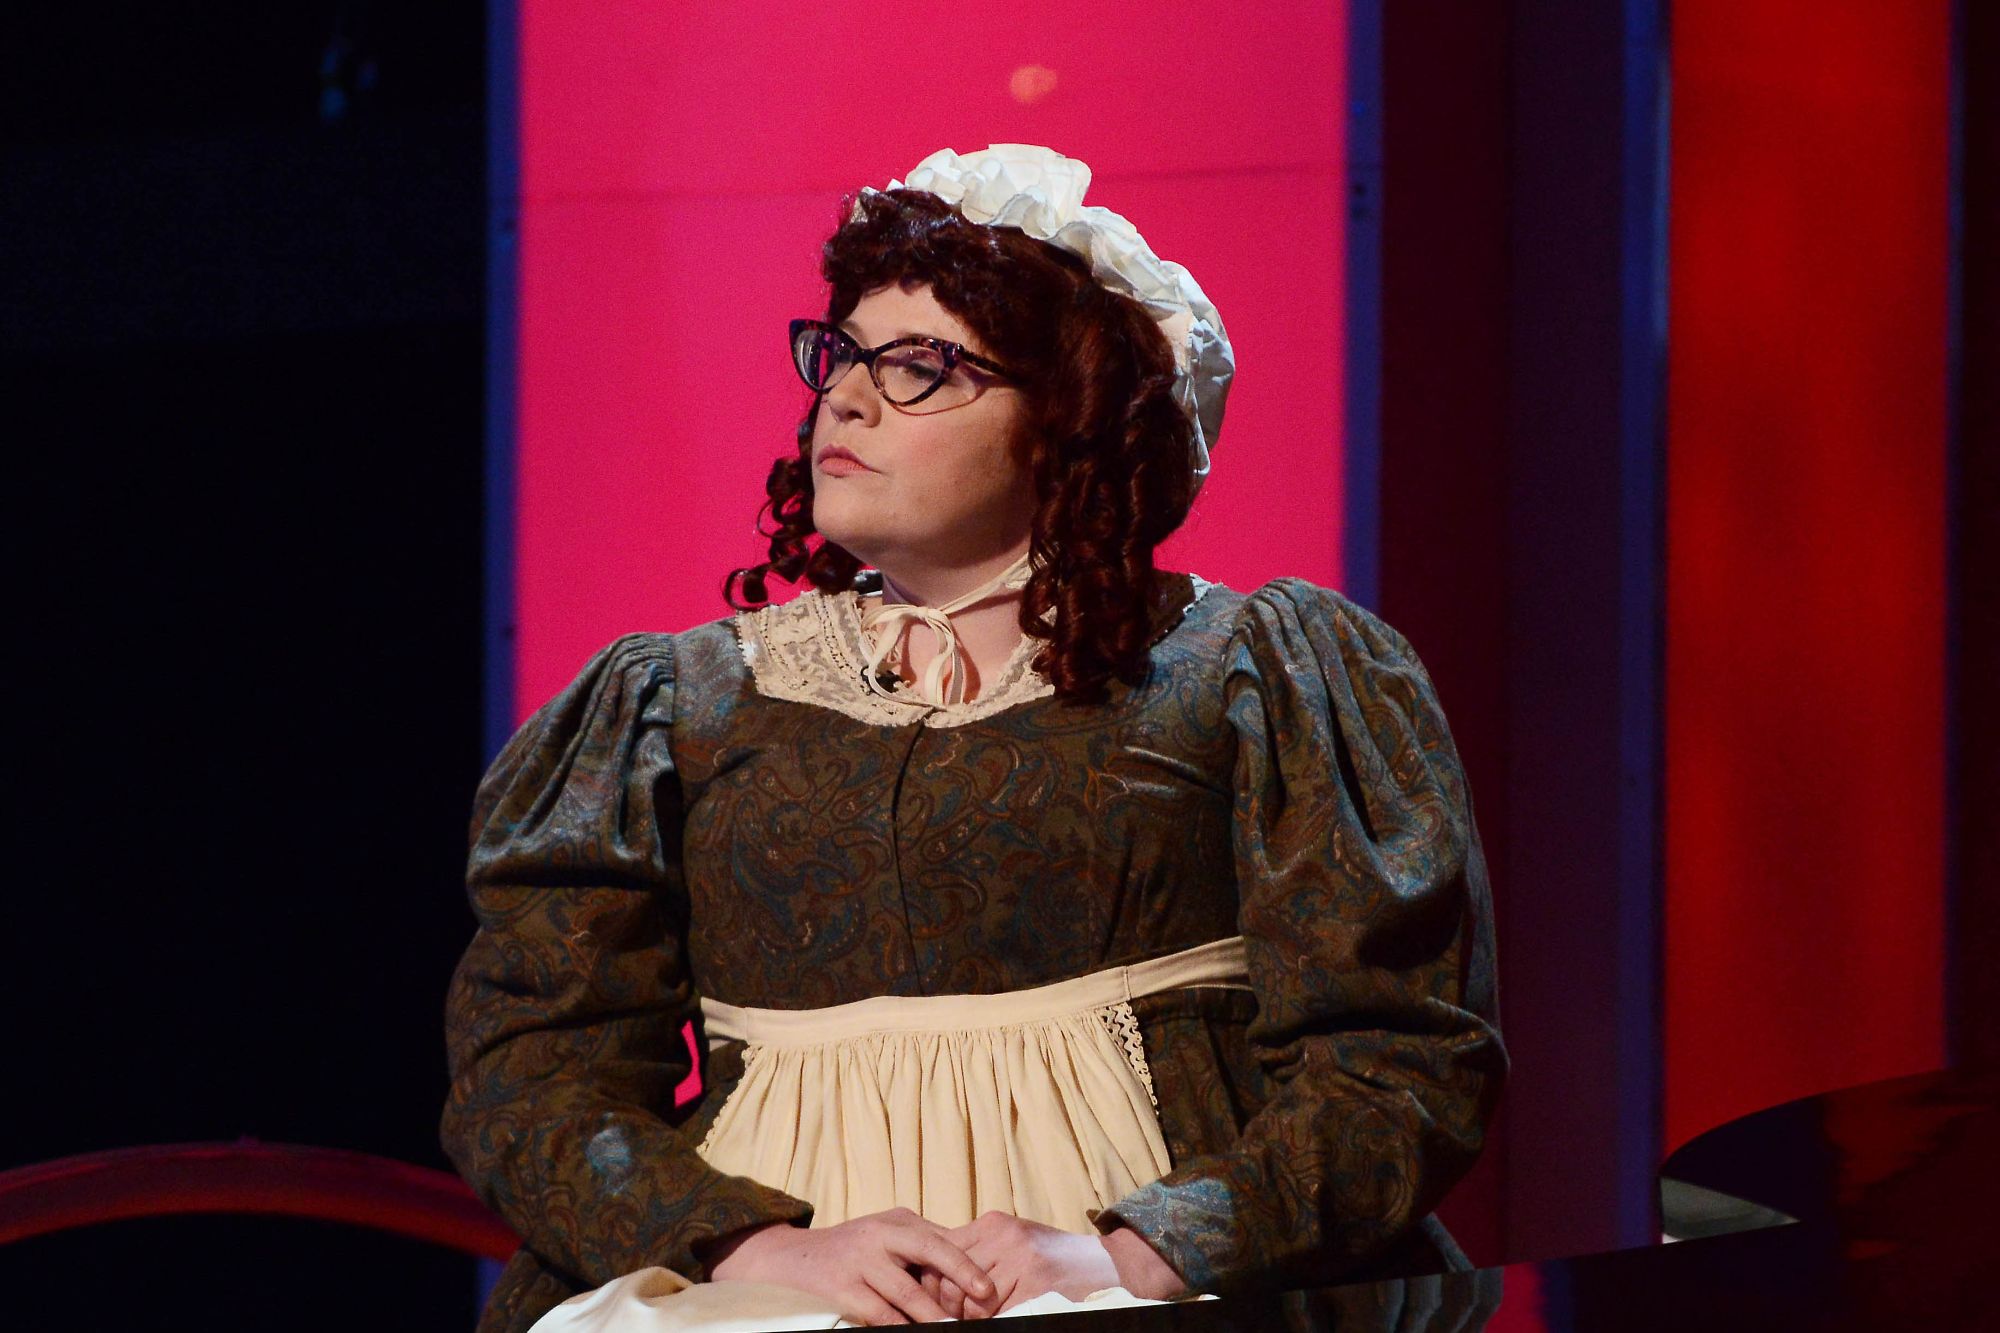 Jenny Ryan von The Chase als Mrs. Cratchit in der TV-Serie „A Christmas Chase Celebrity Special“.